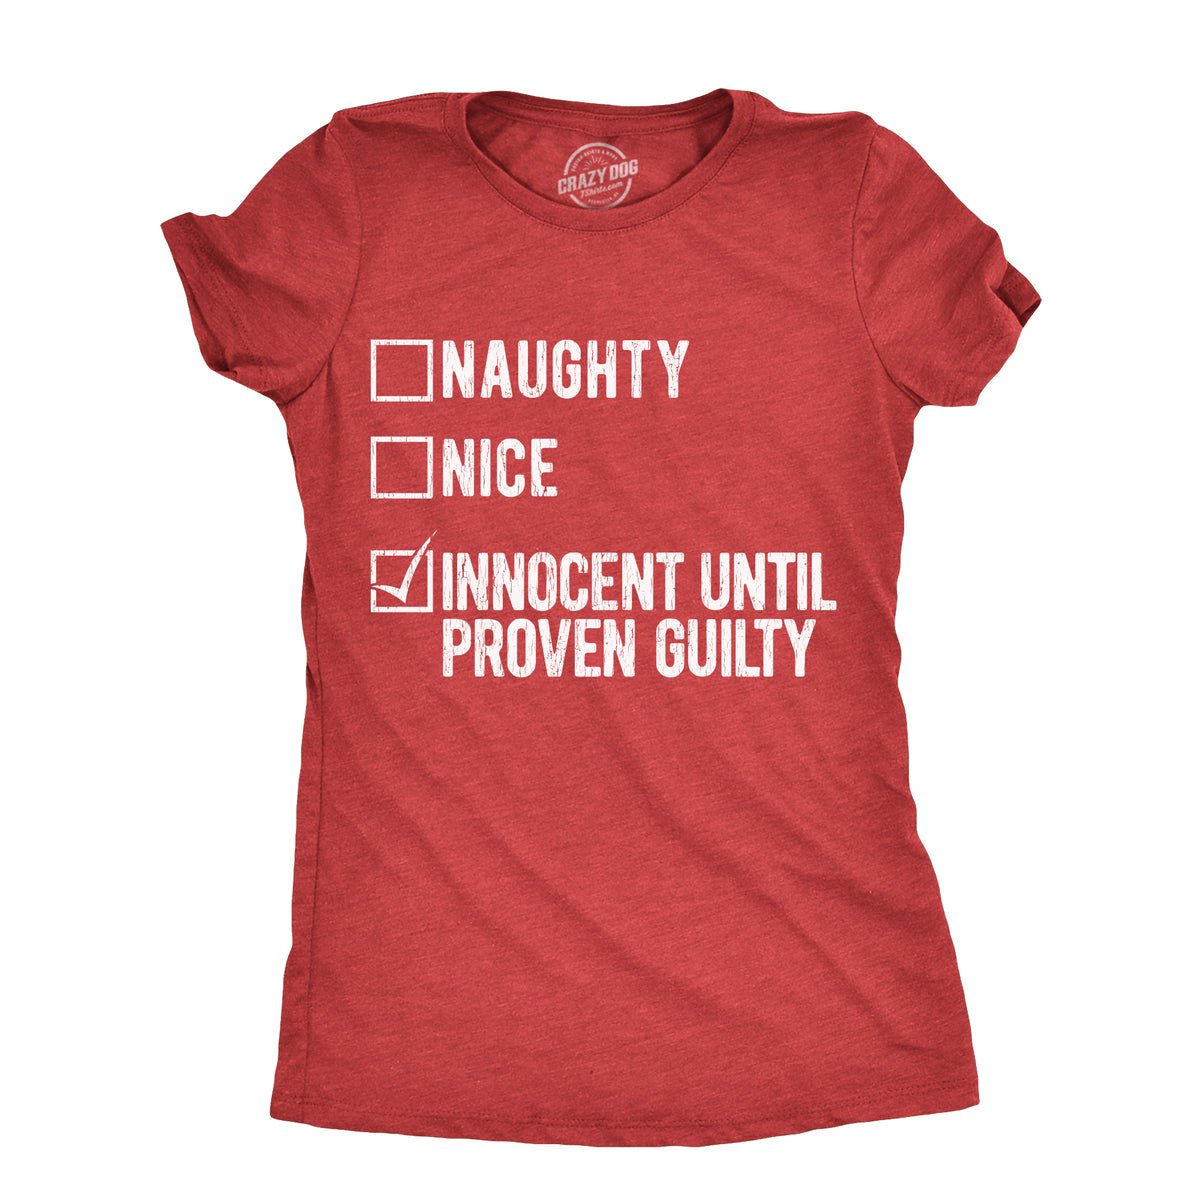 Funny Heather Red - INNOCENT Naughty Nice Innocent Until Proven Guilty Womens T Shirt Nerdy Christmas sarcastic Tee